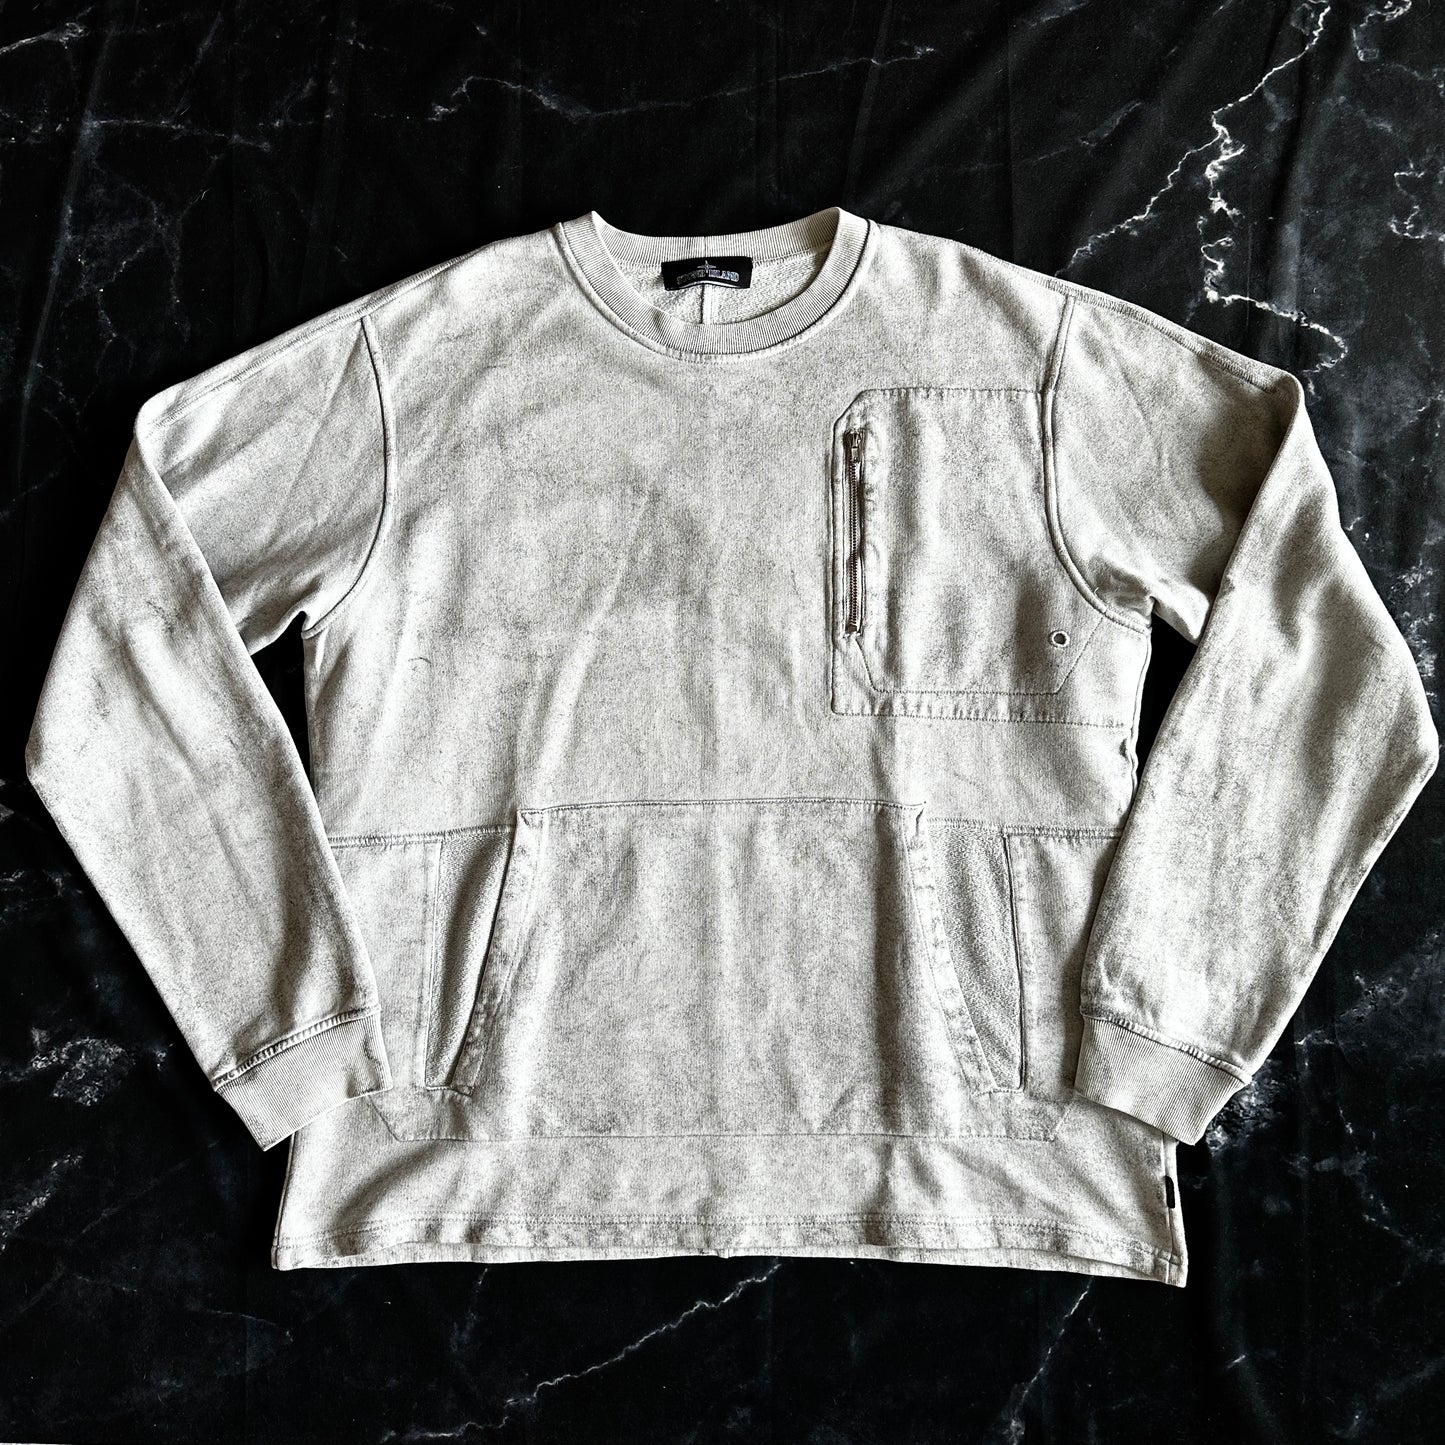 Stone Island Shadow Project Fallout Colour Treatment 2016 Sweatshirt - XL - Made in Italy